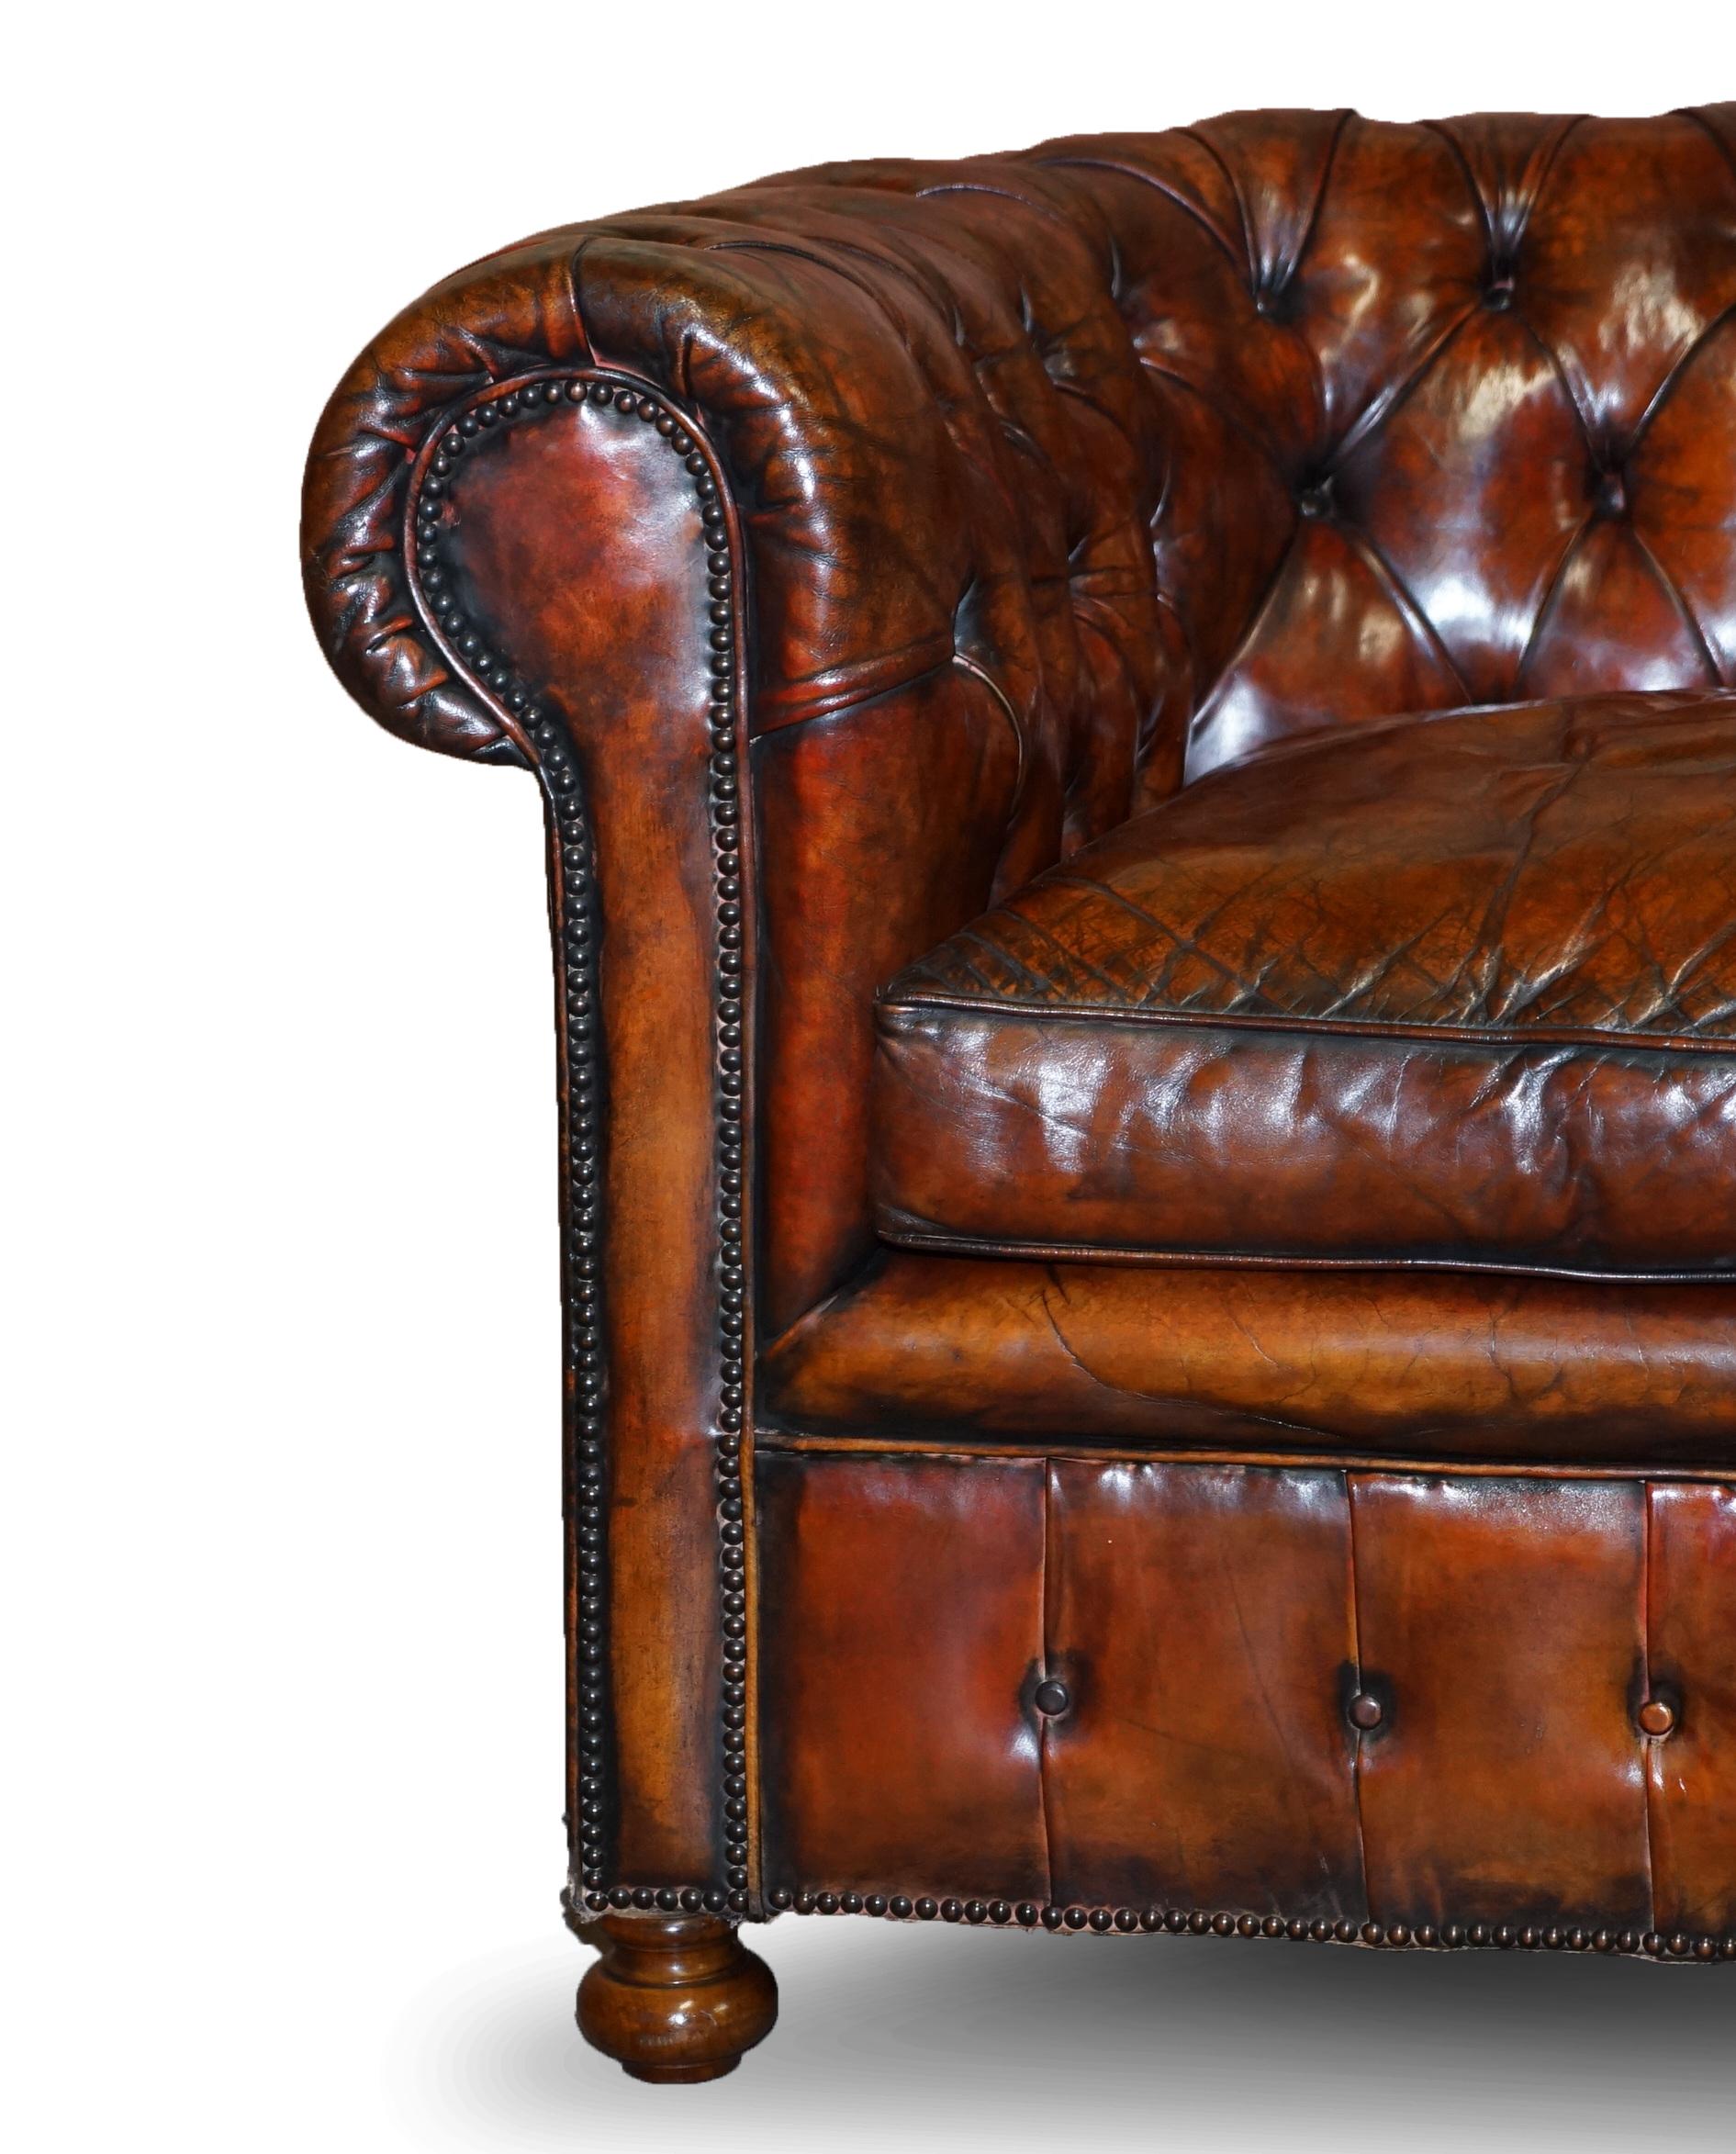 English Rare Victorian Chesterfield Brown Leather Six Piece Sofa Armchairs Stool Suite